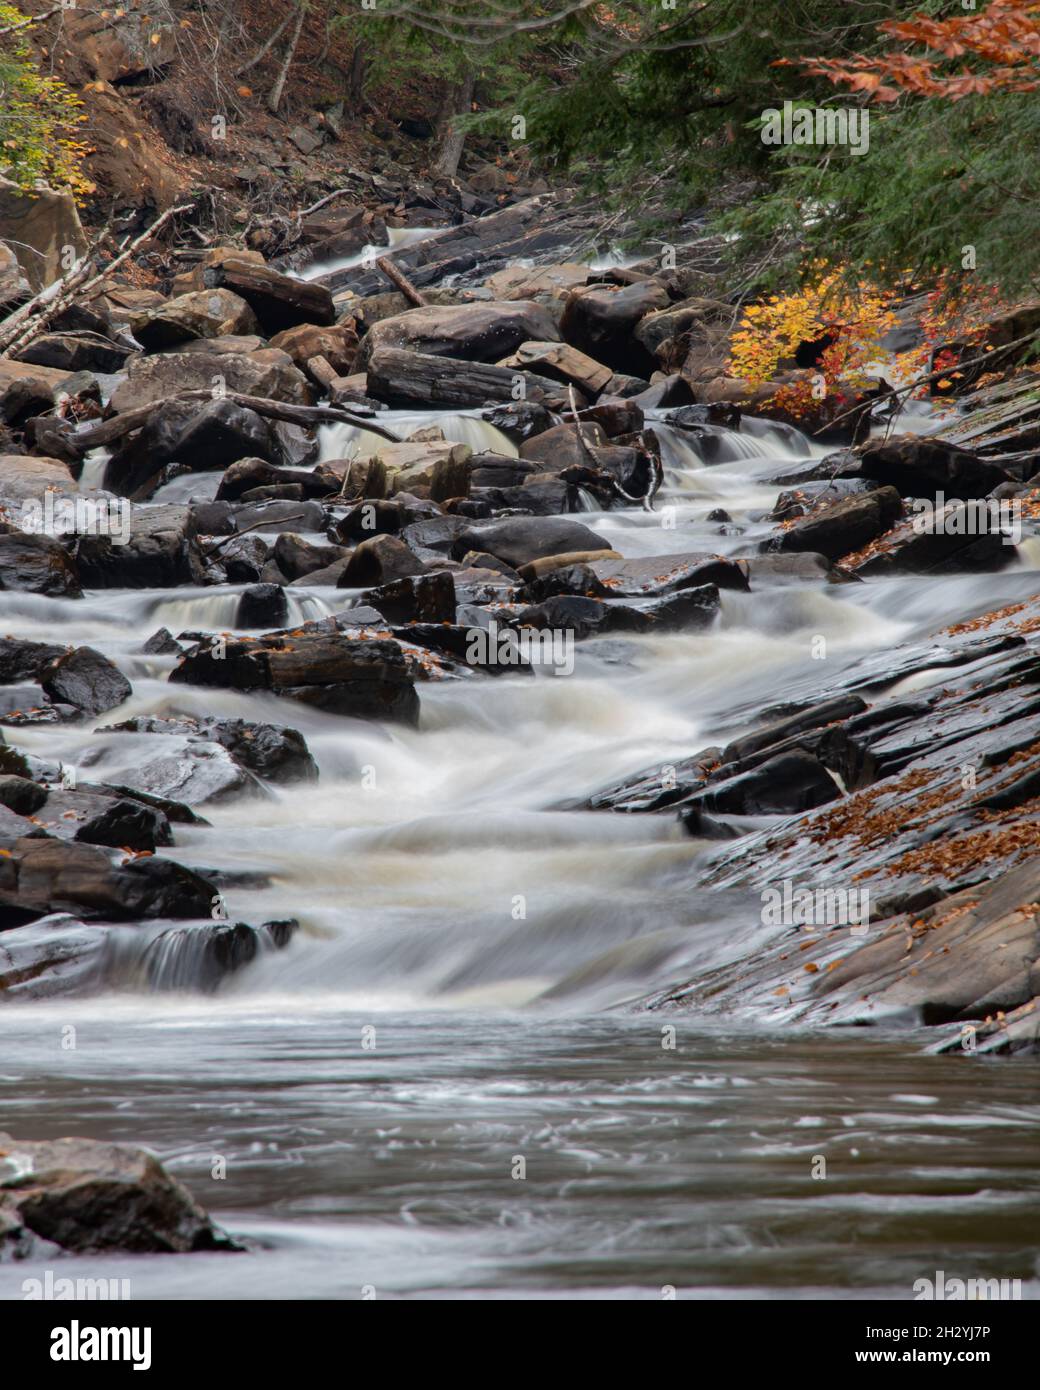 A long exposure image of falls on the Sacandaga River in the Adirondack Mountains, NY USA in autumn Stock Photo